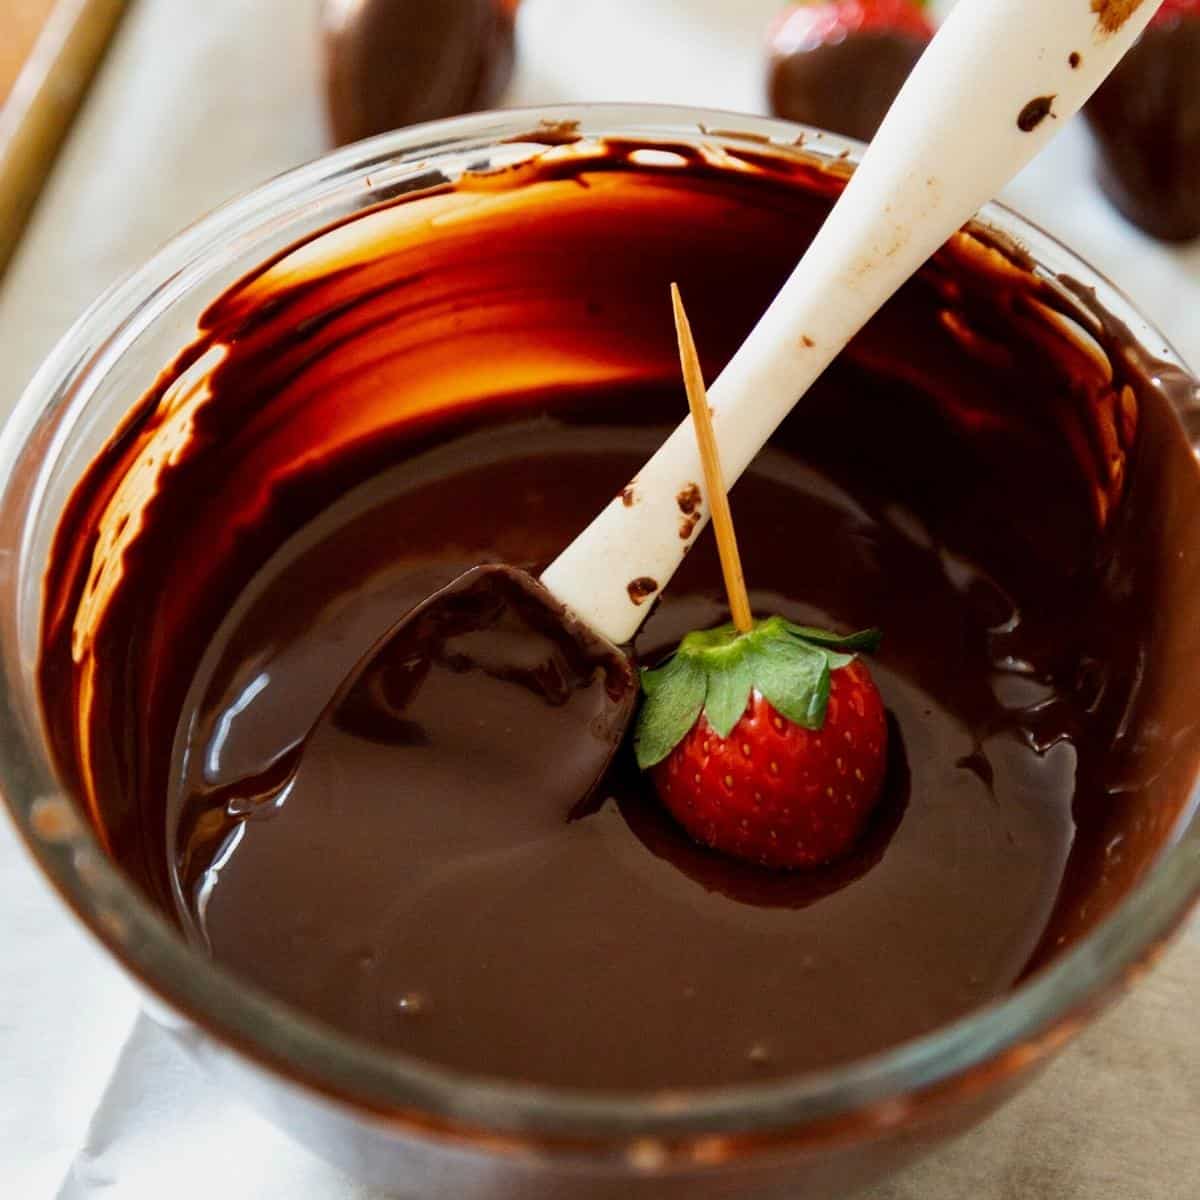 A bowl with melted chocolate and strawberries.